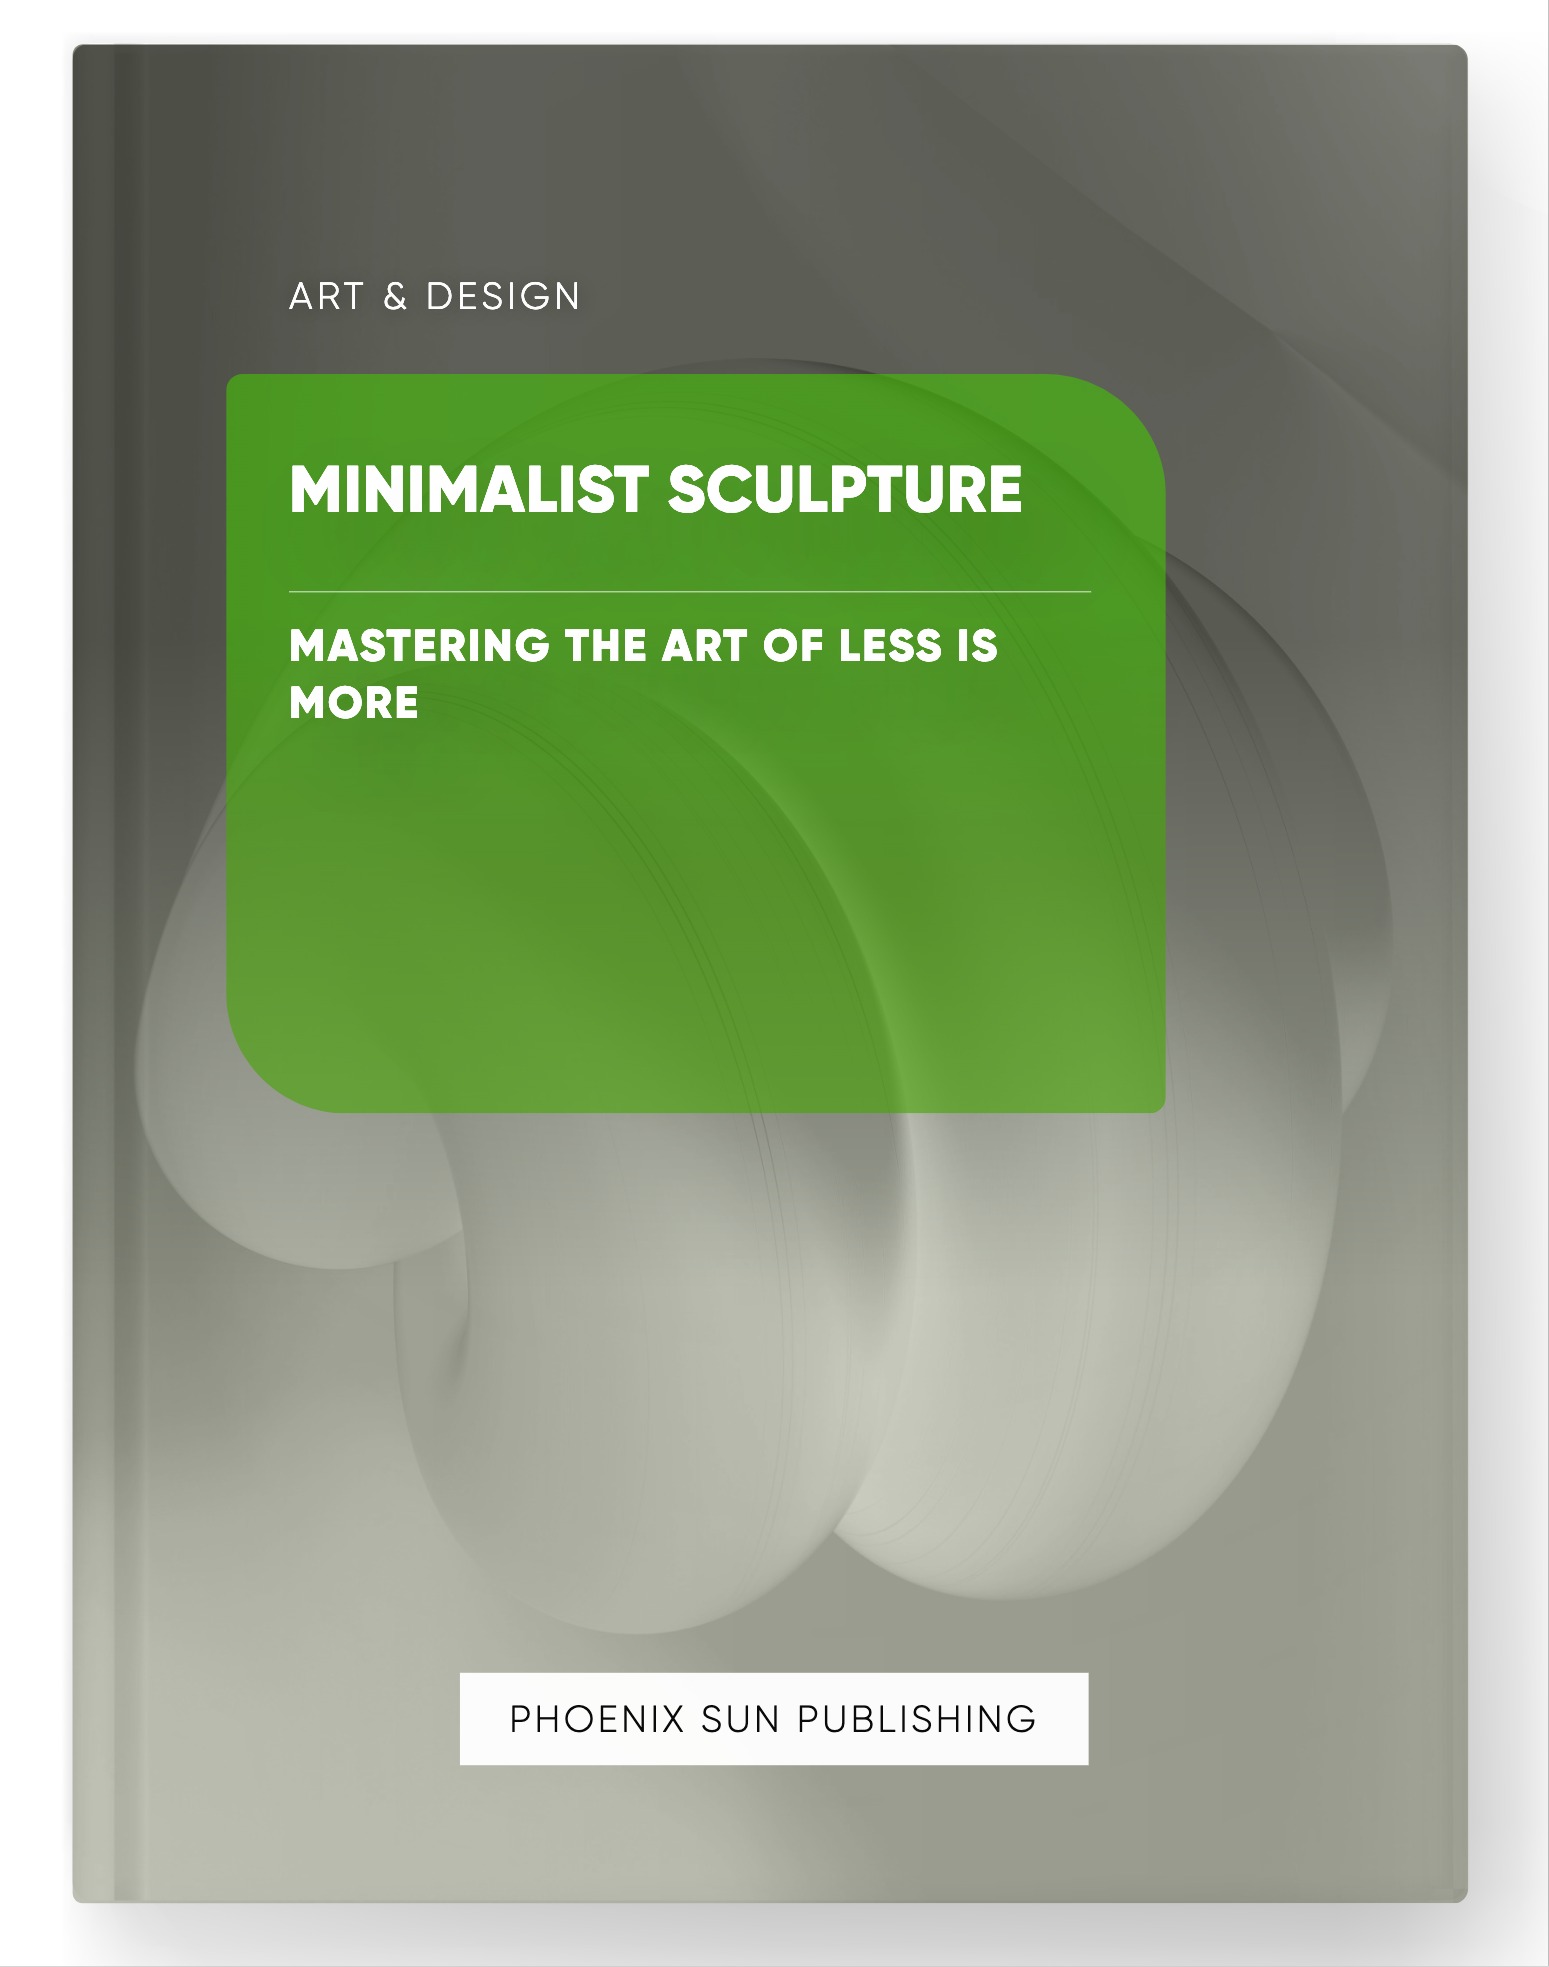 Minimalist Sculpture – Mastering the Art of Less is More